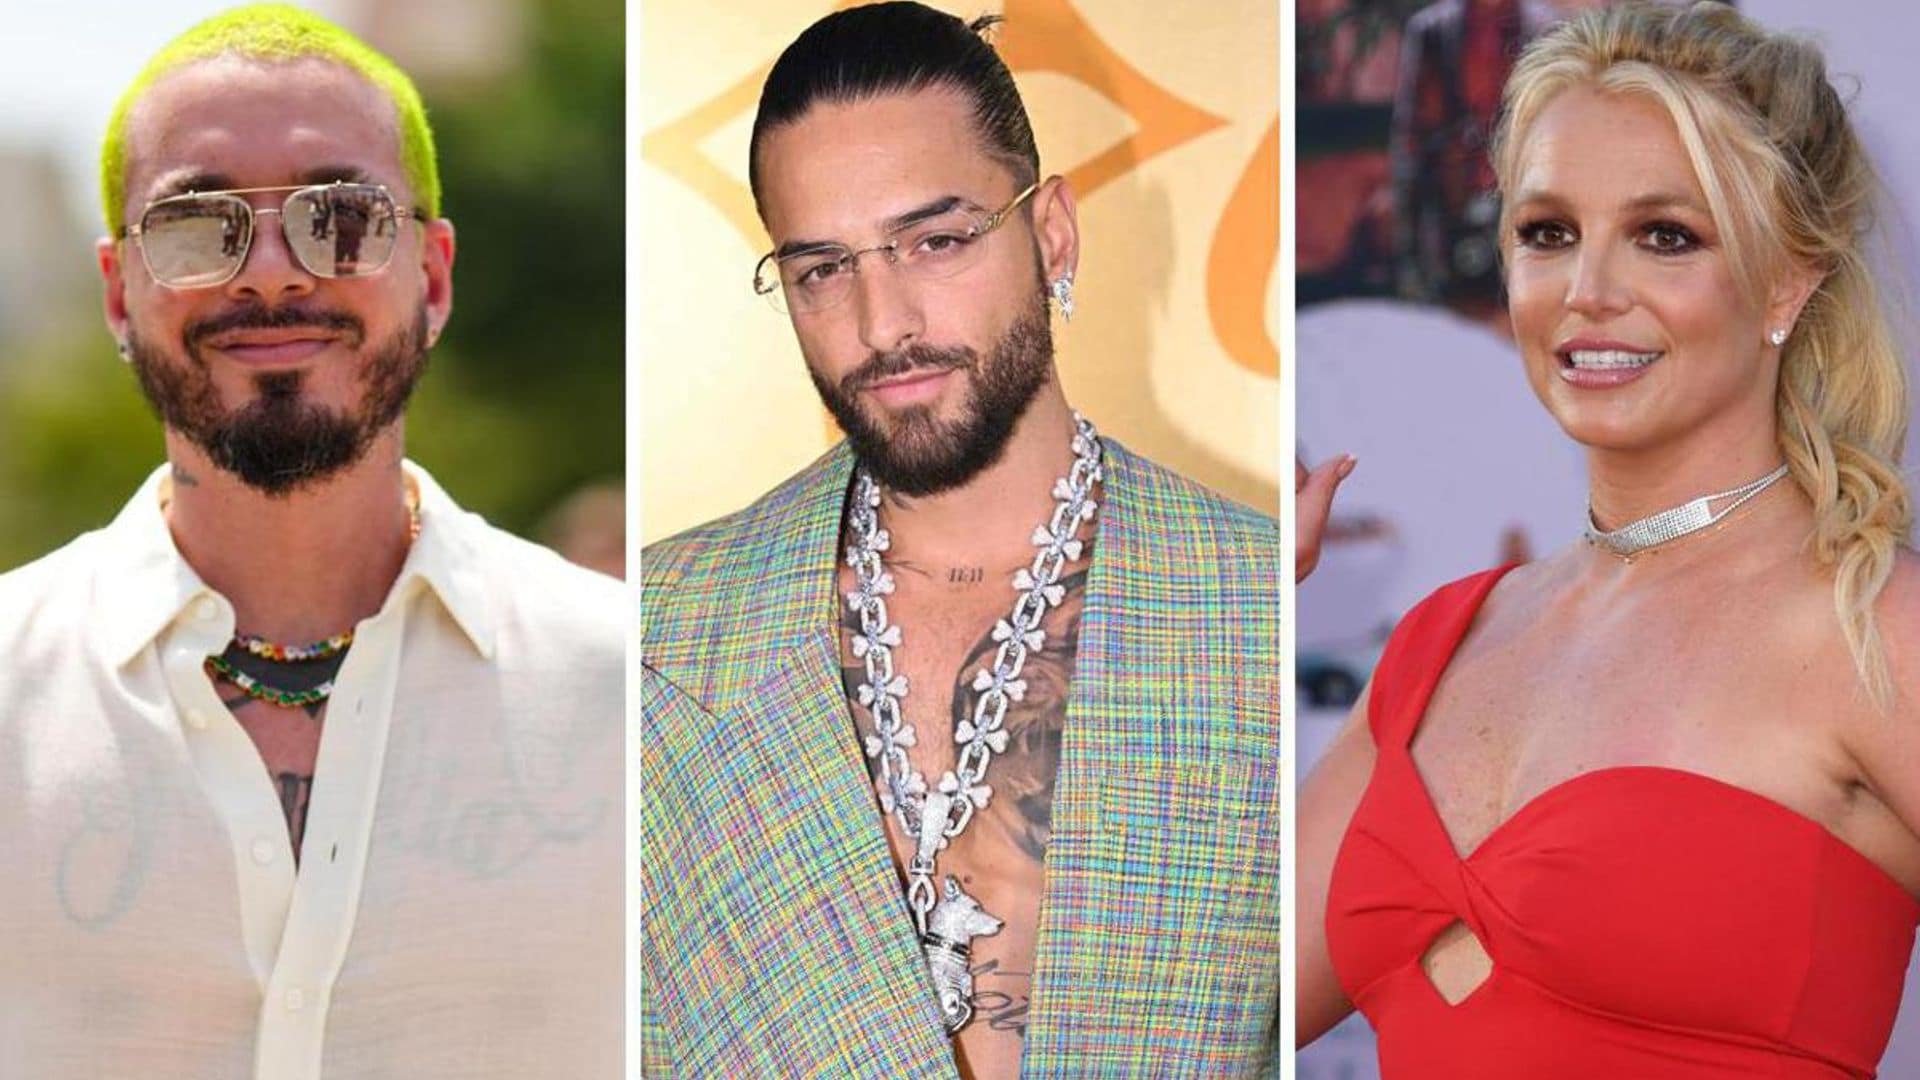 J Balvin talks about the famous photo of himself, Maluma, and Britney Spears in NY